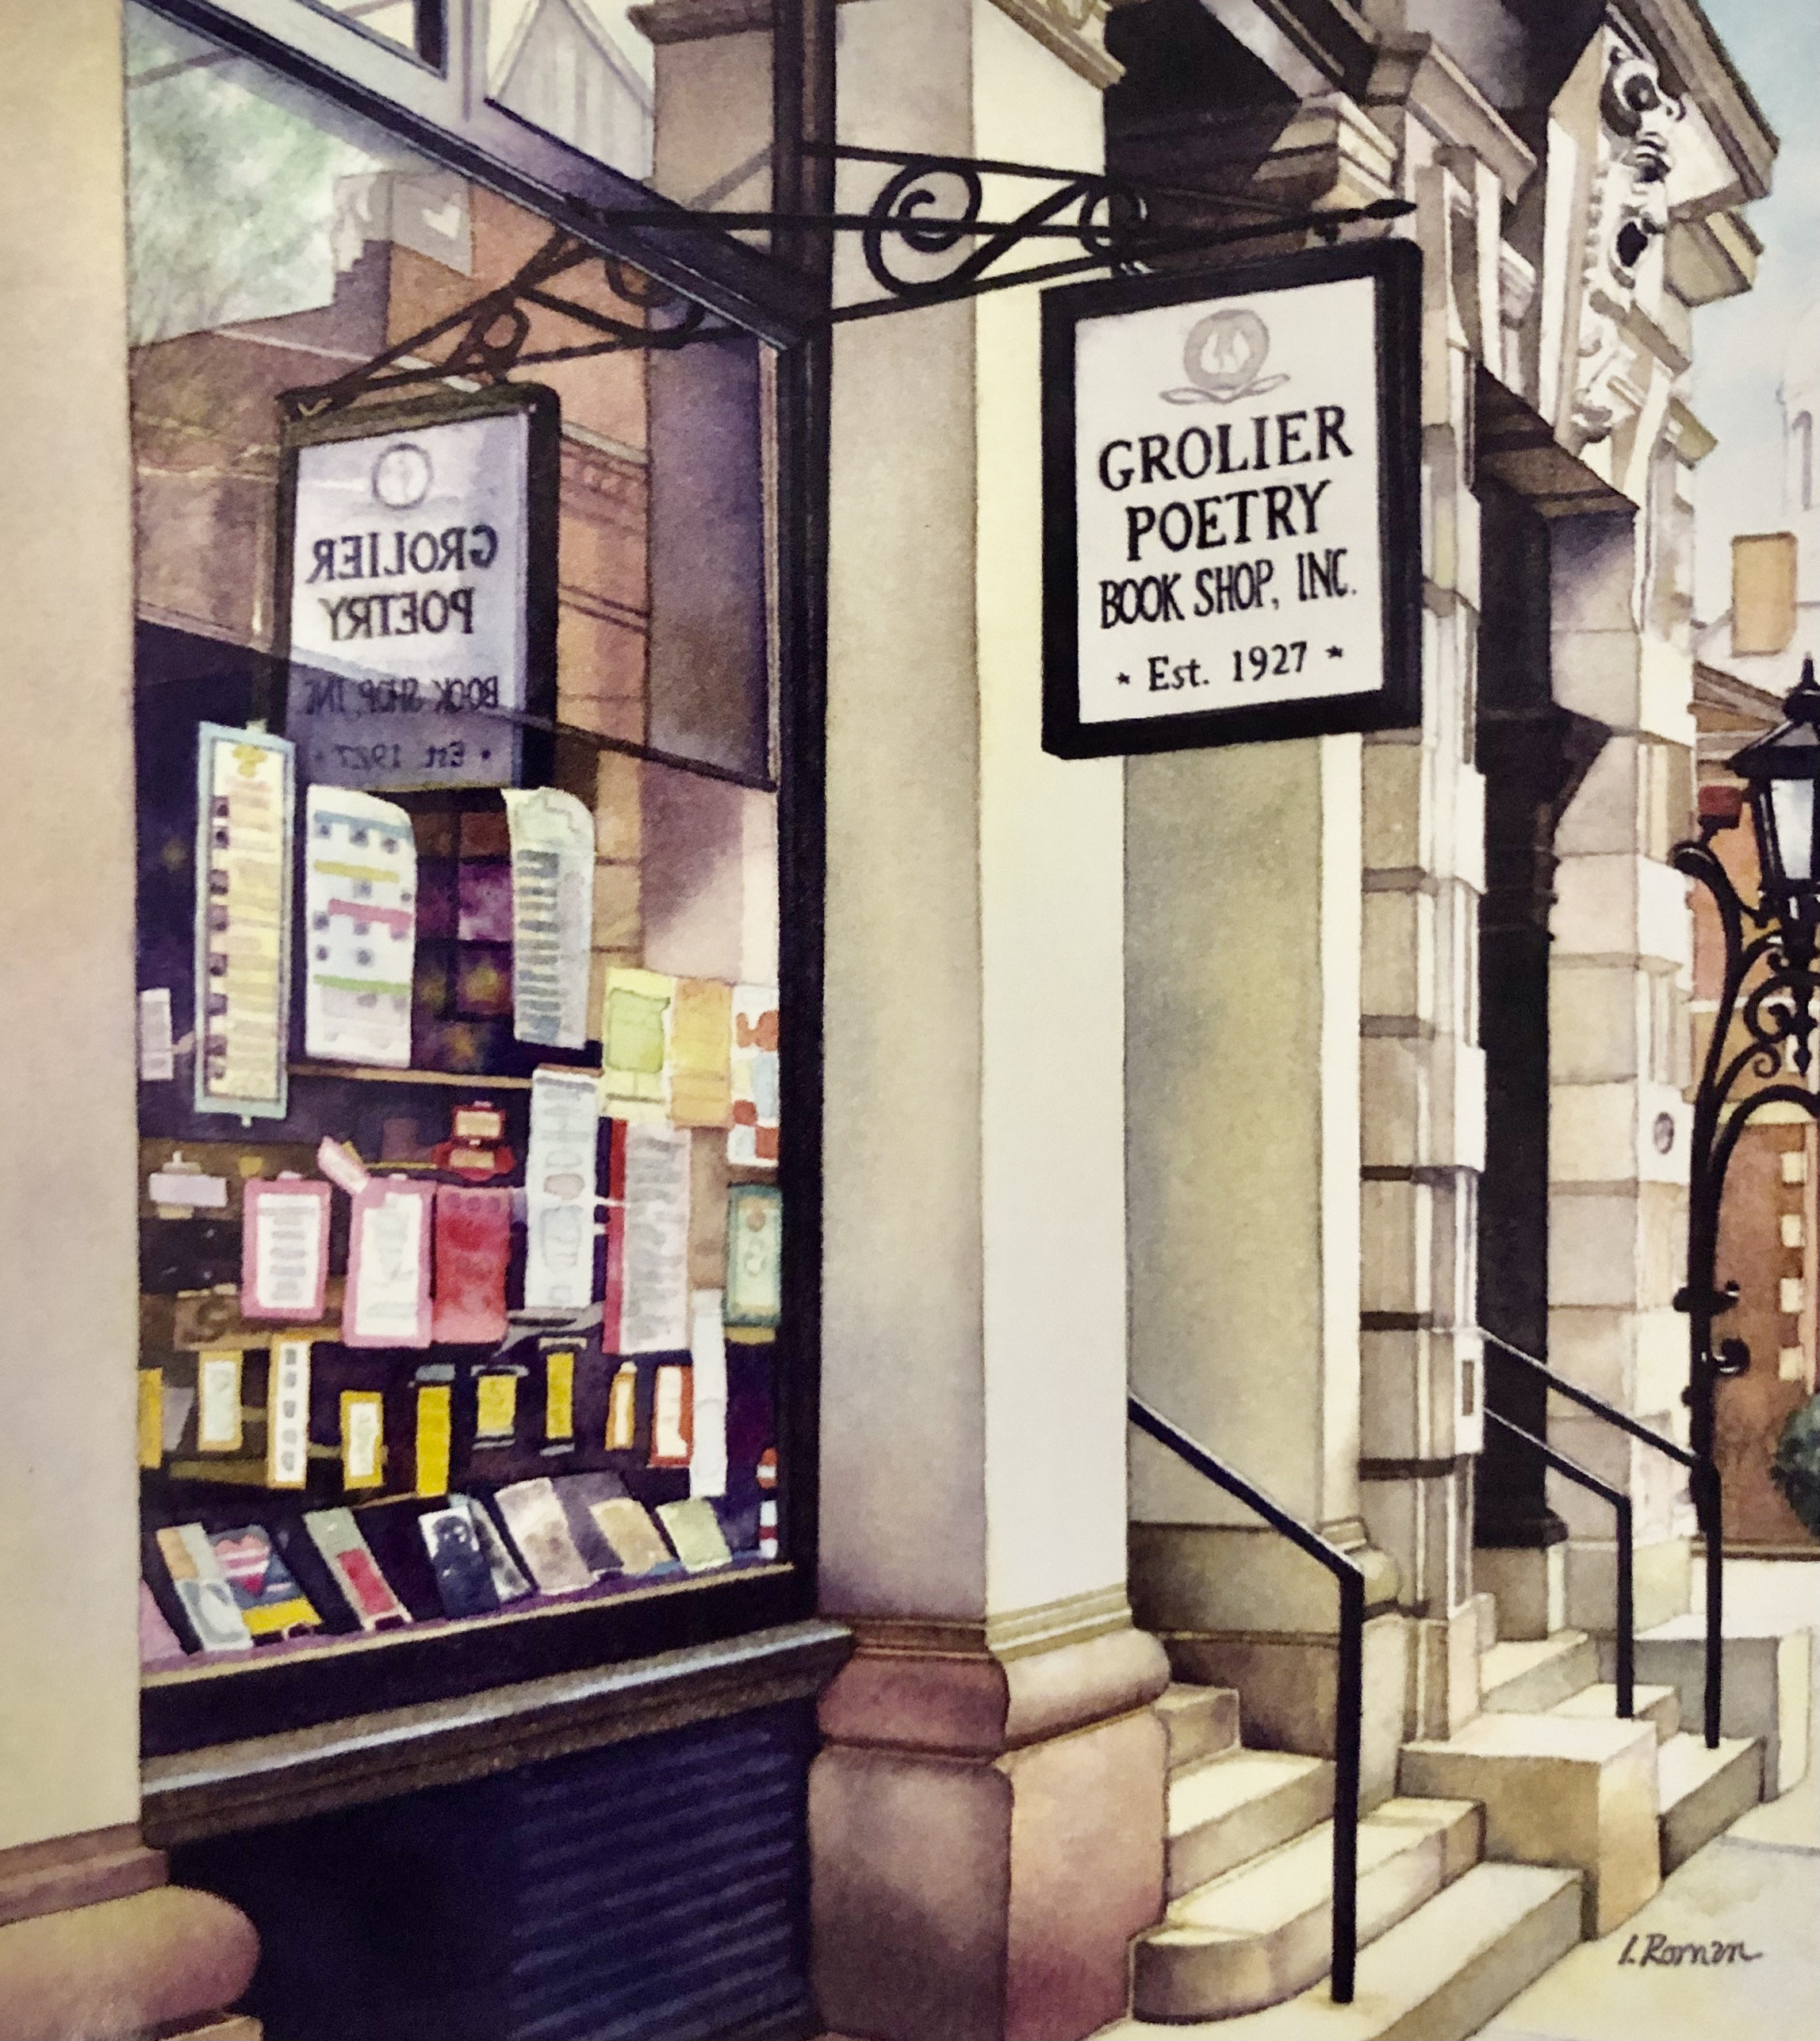 ORAL HISTORY INITIATIVE: On the Grolier Poetry Book Shop